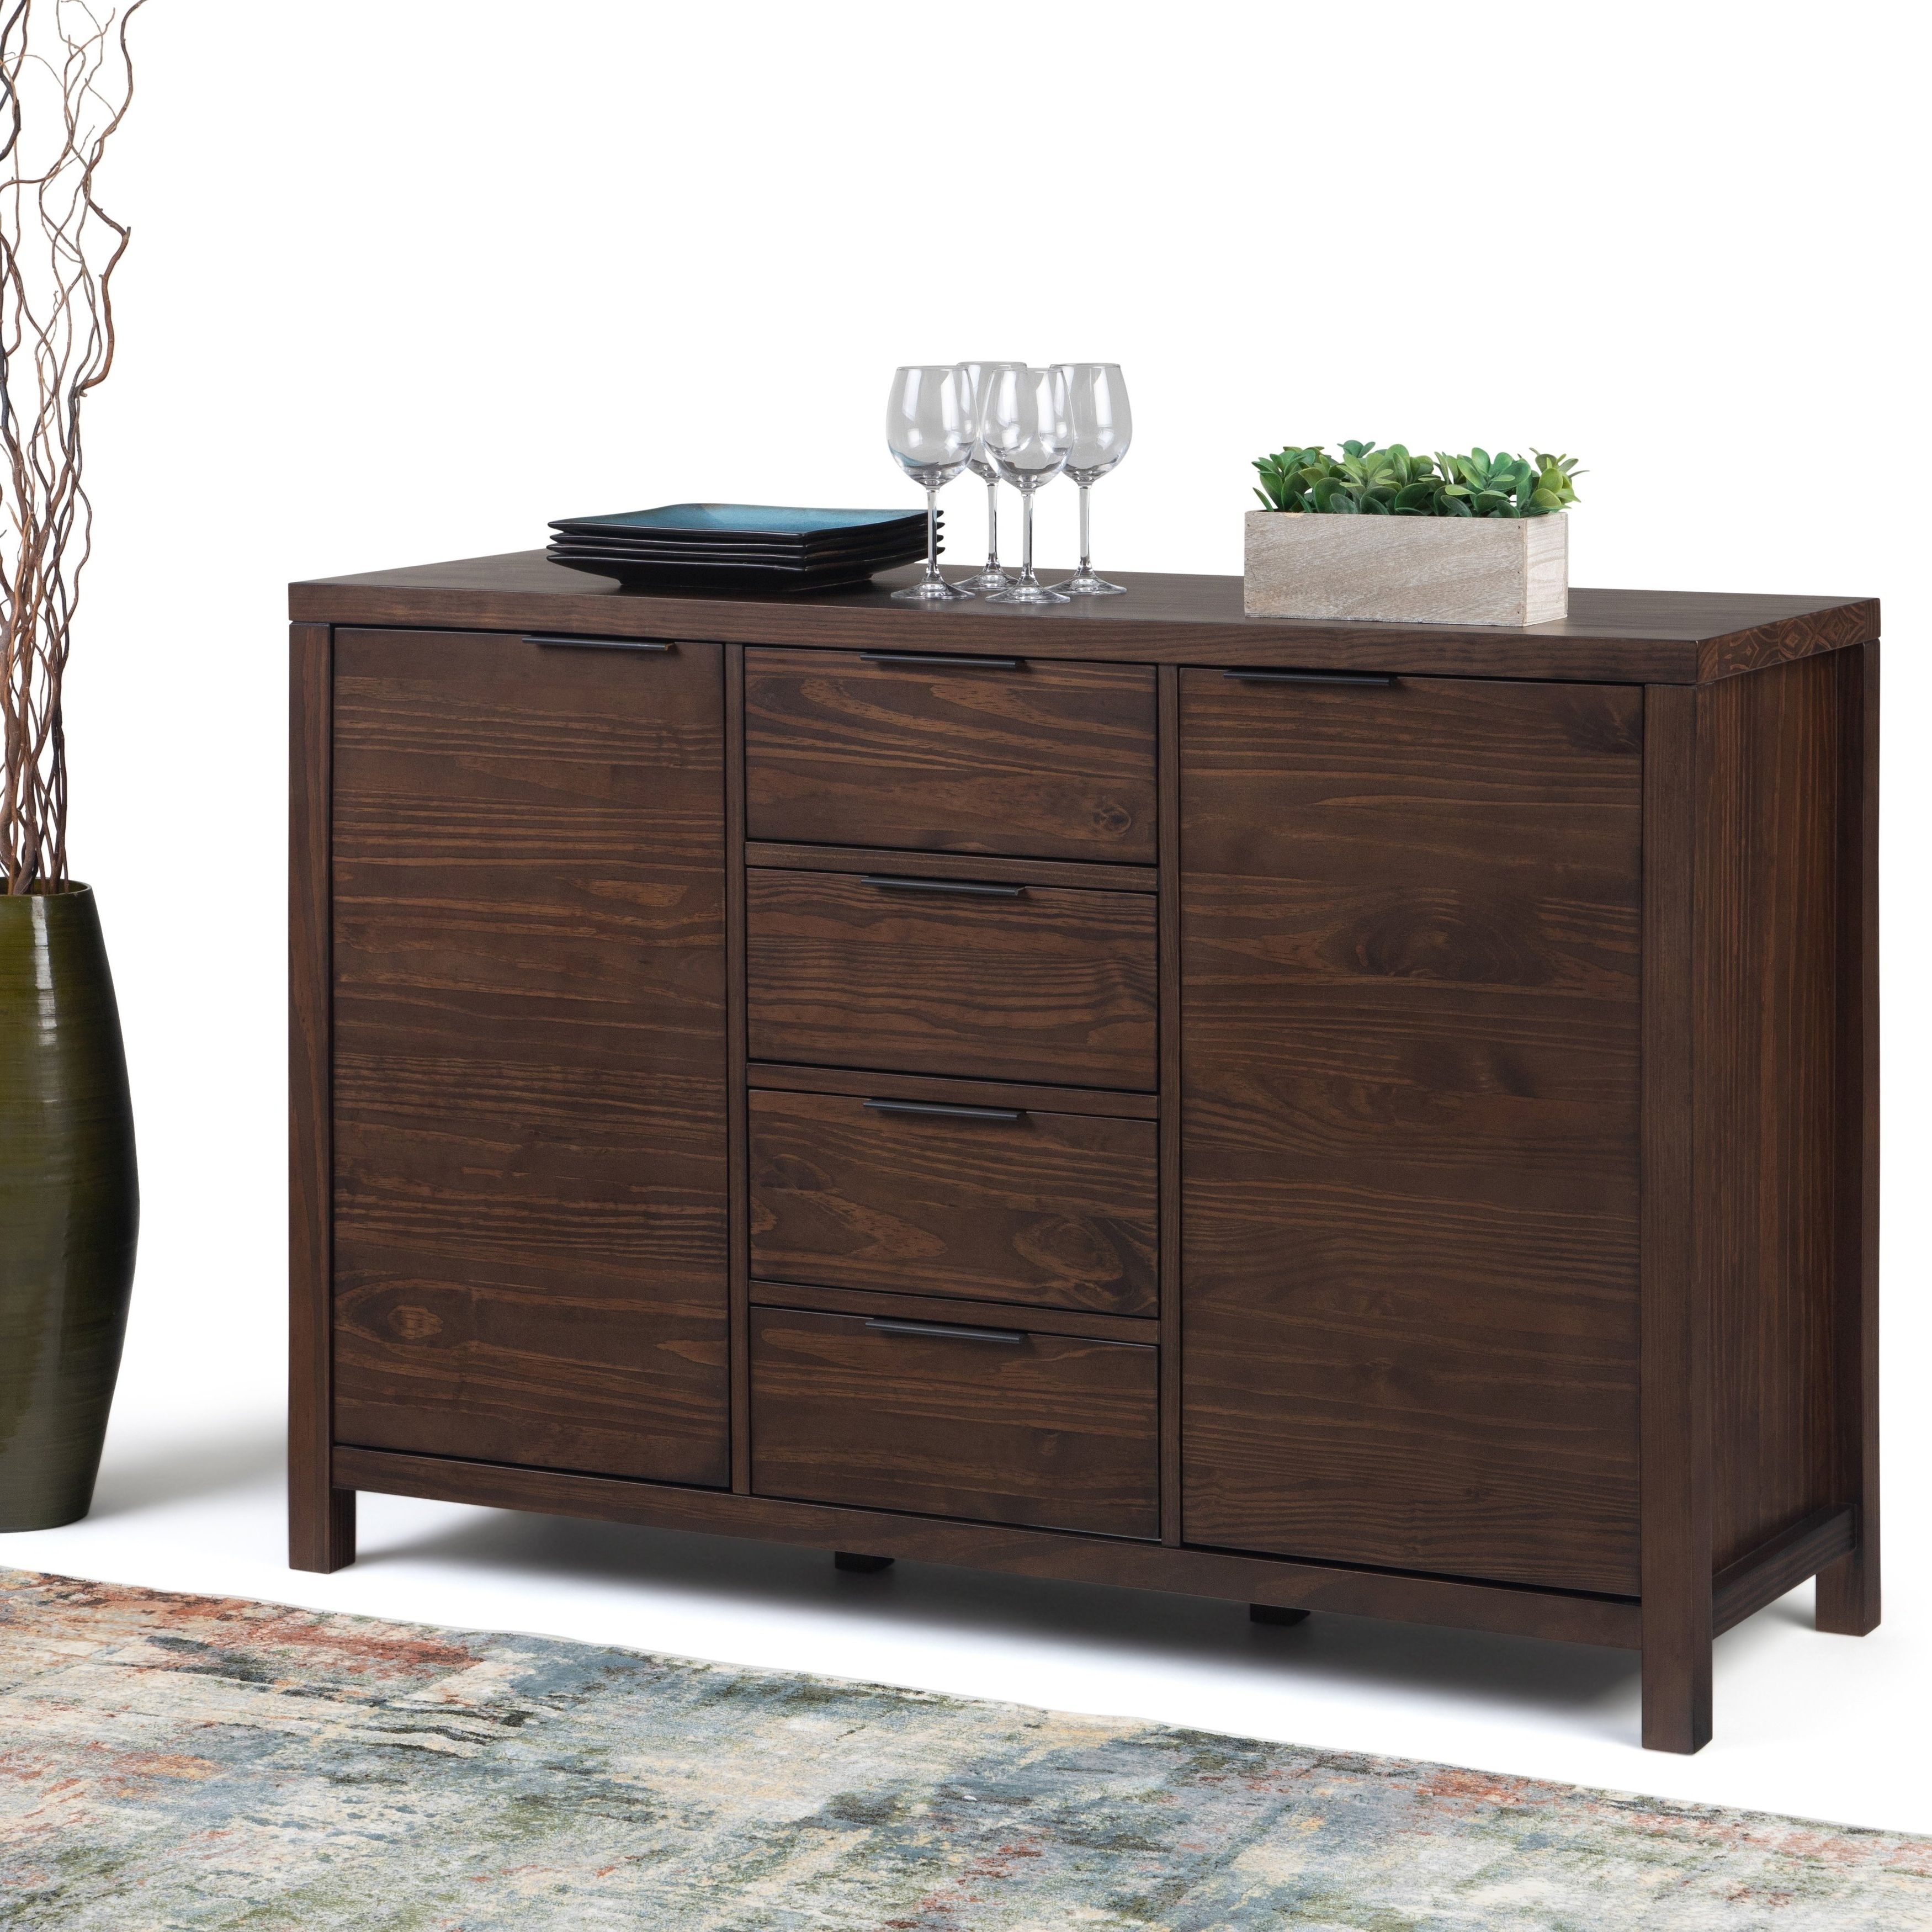 Wyndenhall Fabian Solid Wood 54 Inch Wide Modern Within Solid Wood Contemporary Sideboards Buffets (View 2 of 20)